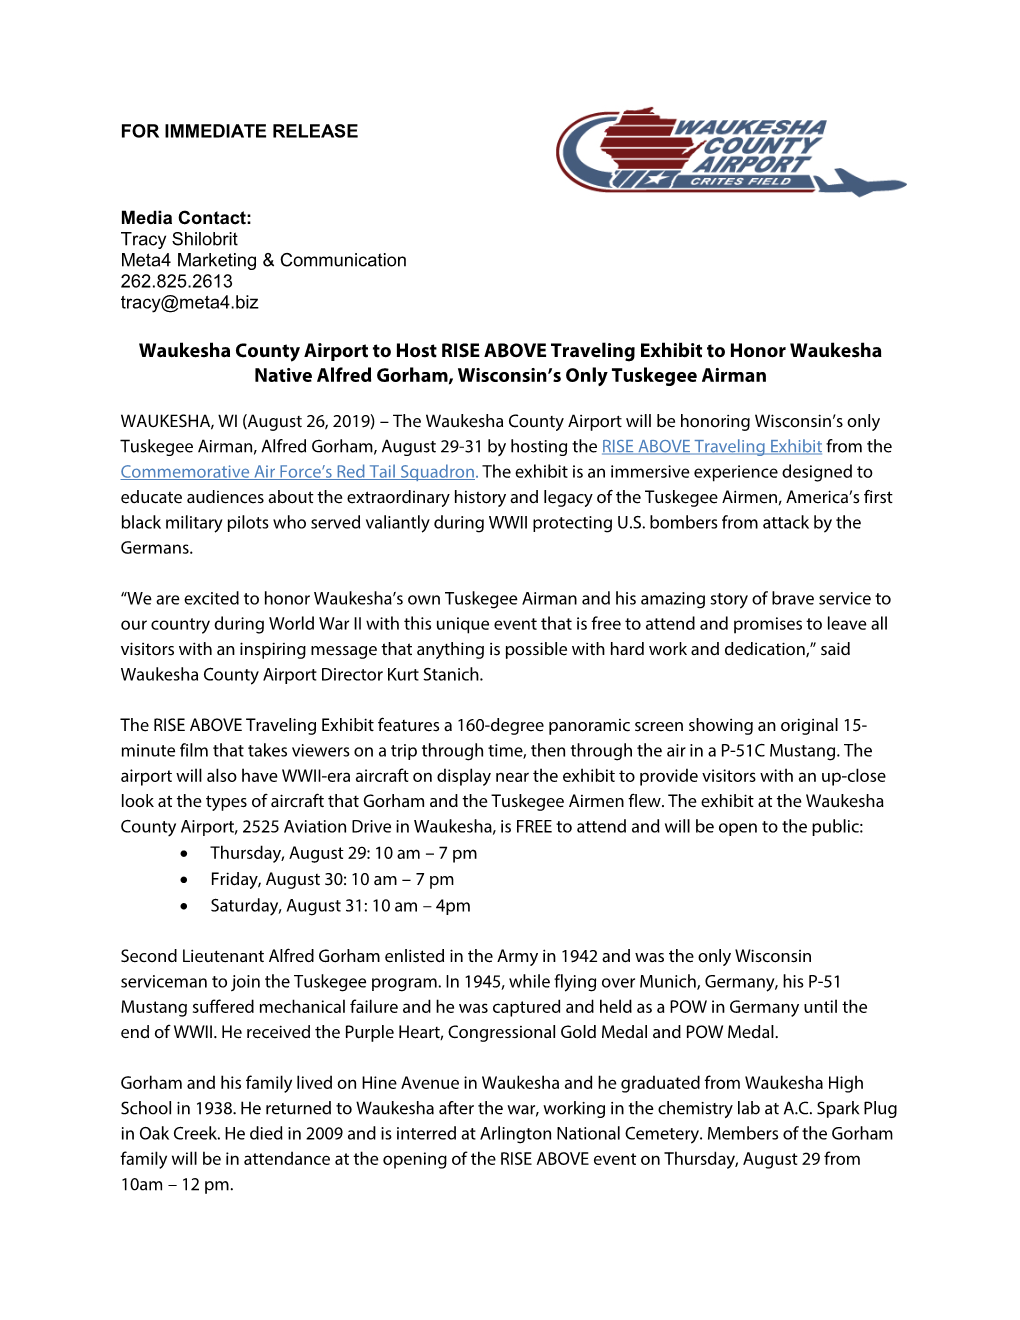 Waukesha County Airport to Host RISE ABOVE Traveling Exhibit to Honor Waukesha Native Alfred Gorham, Wisconsin’S Only Tuskegee Airman